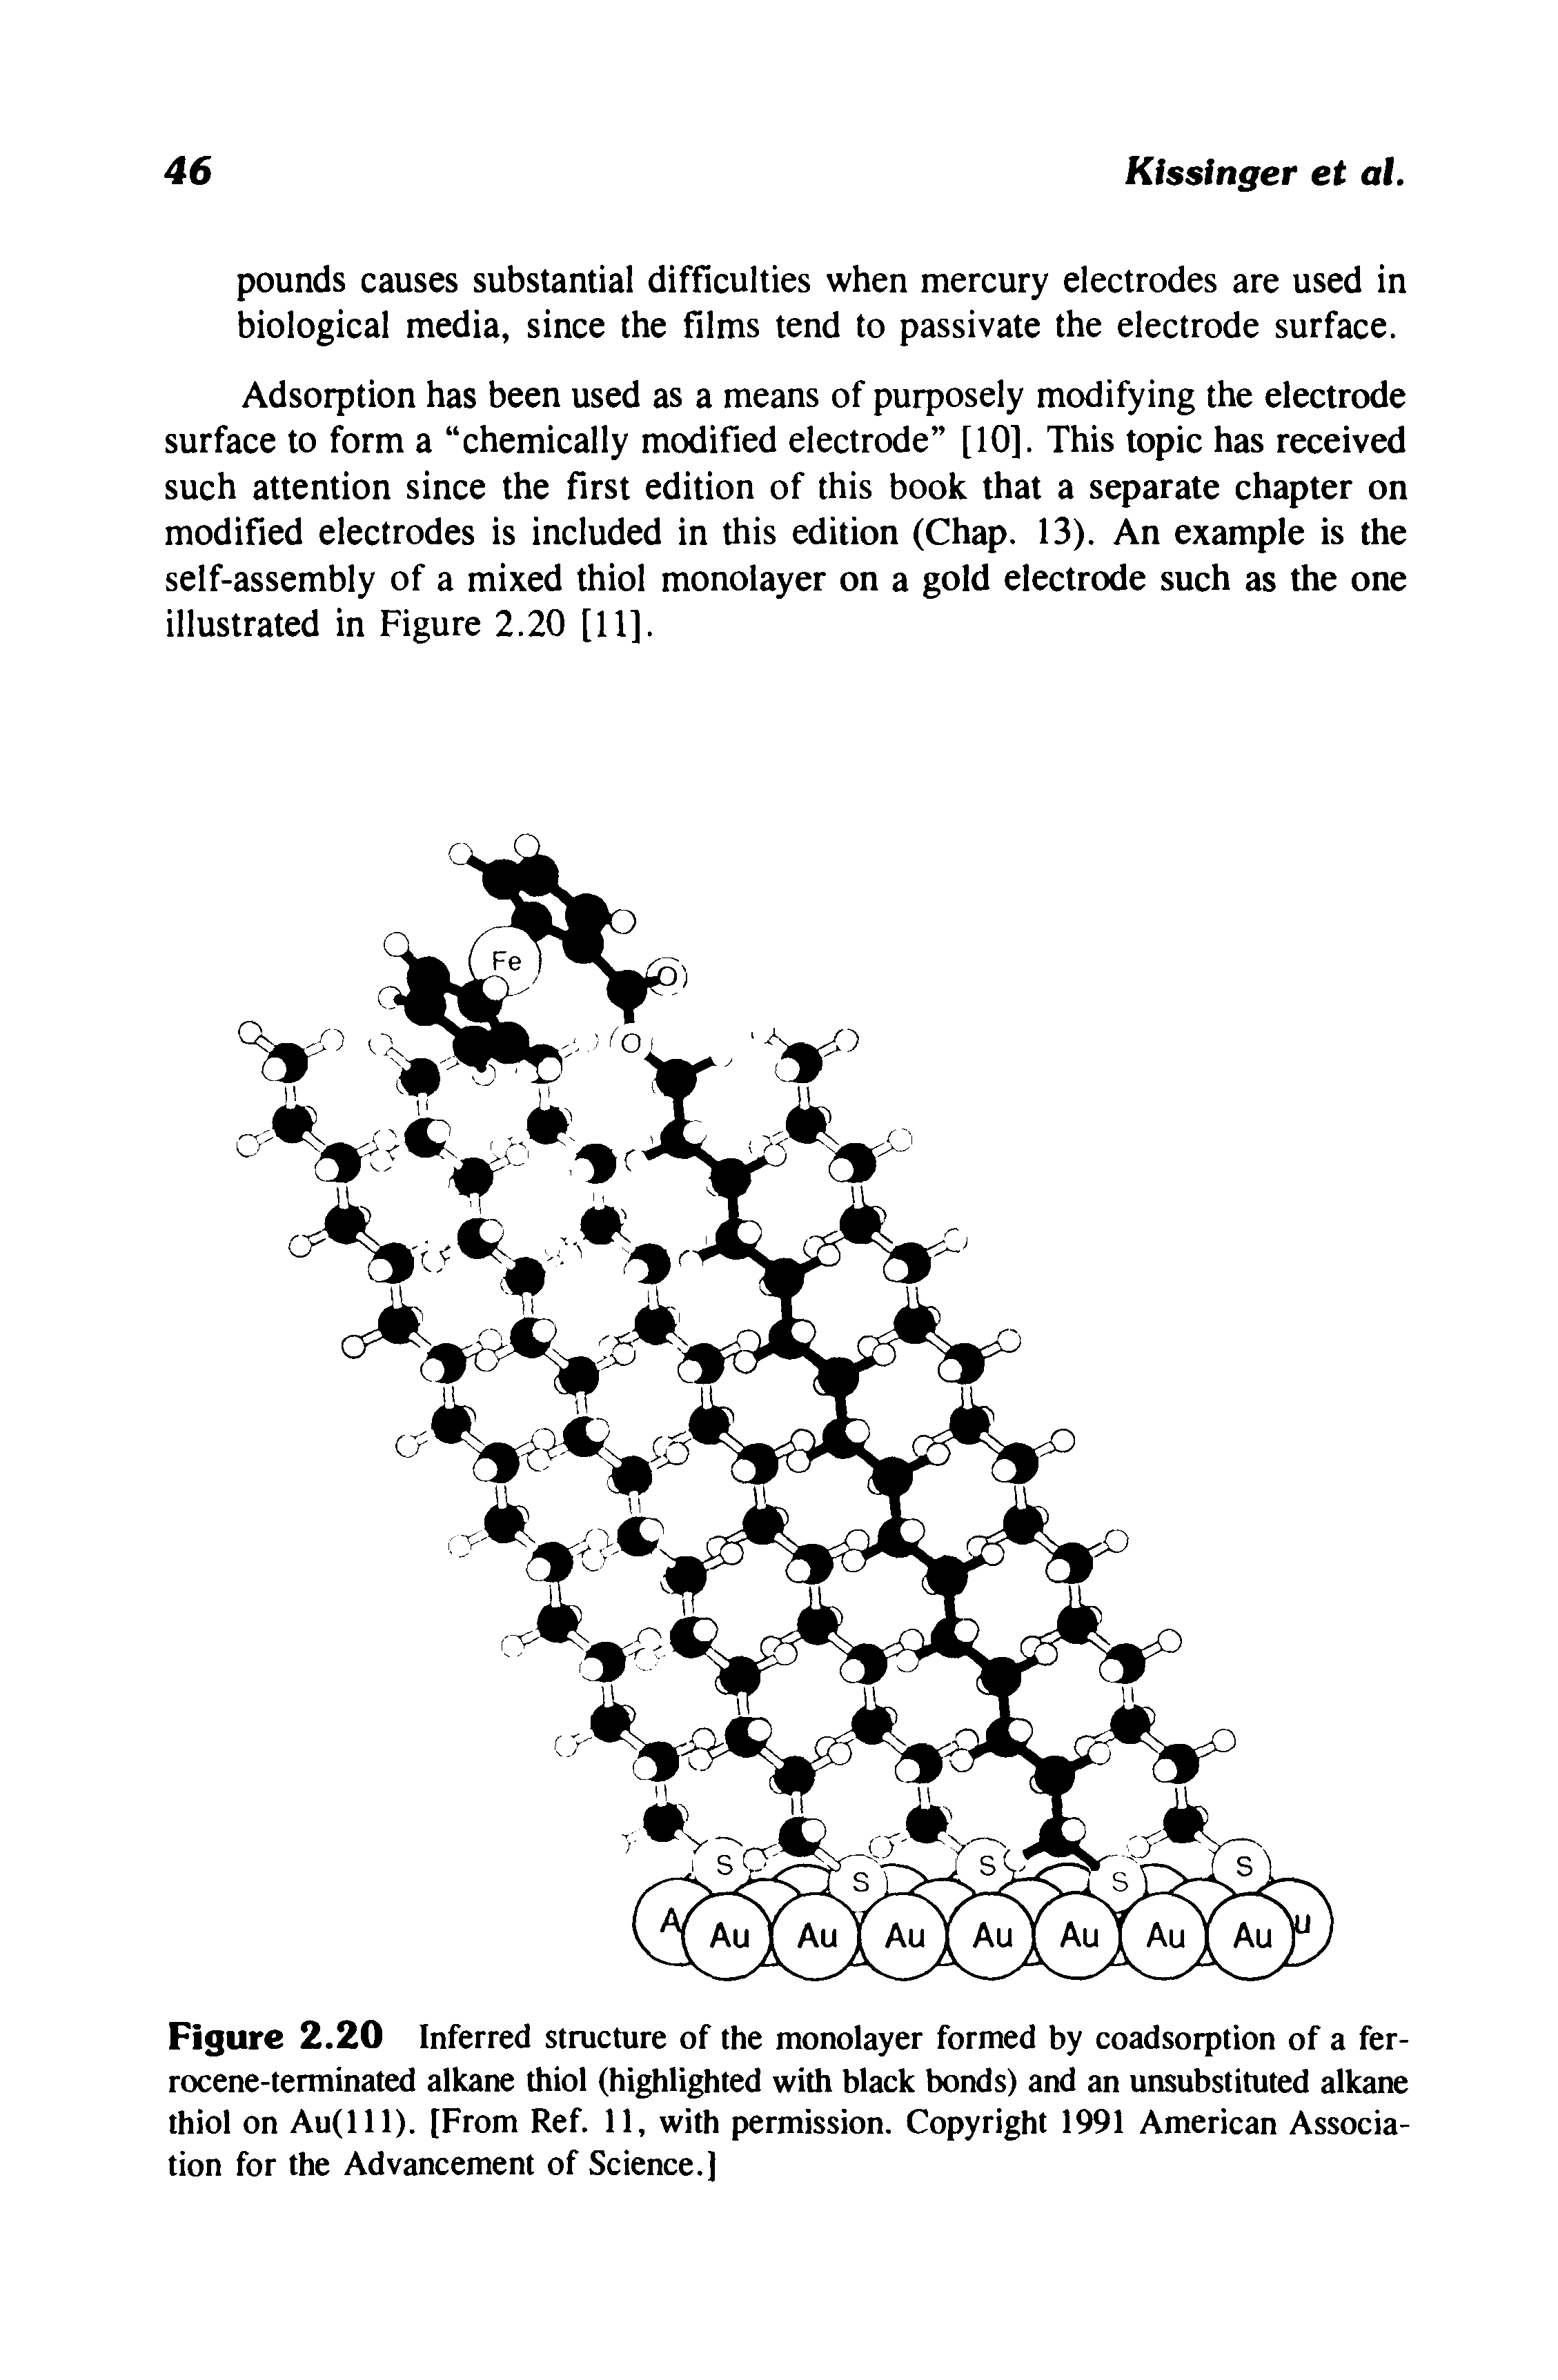 Figure 2.20 Inferred structure of the monolayer formed by coadsorption of a ferrocene-terminated alkane thiol (highlighted with black bonds) and an unsubstituted alkane thiol on Au(lll). [From Ref. 11, with permission. Copyright 1991 American Association for the Advancement of Science.]...